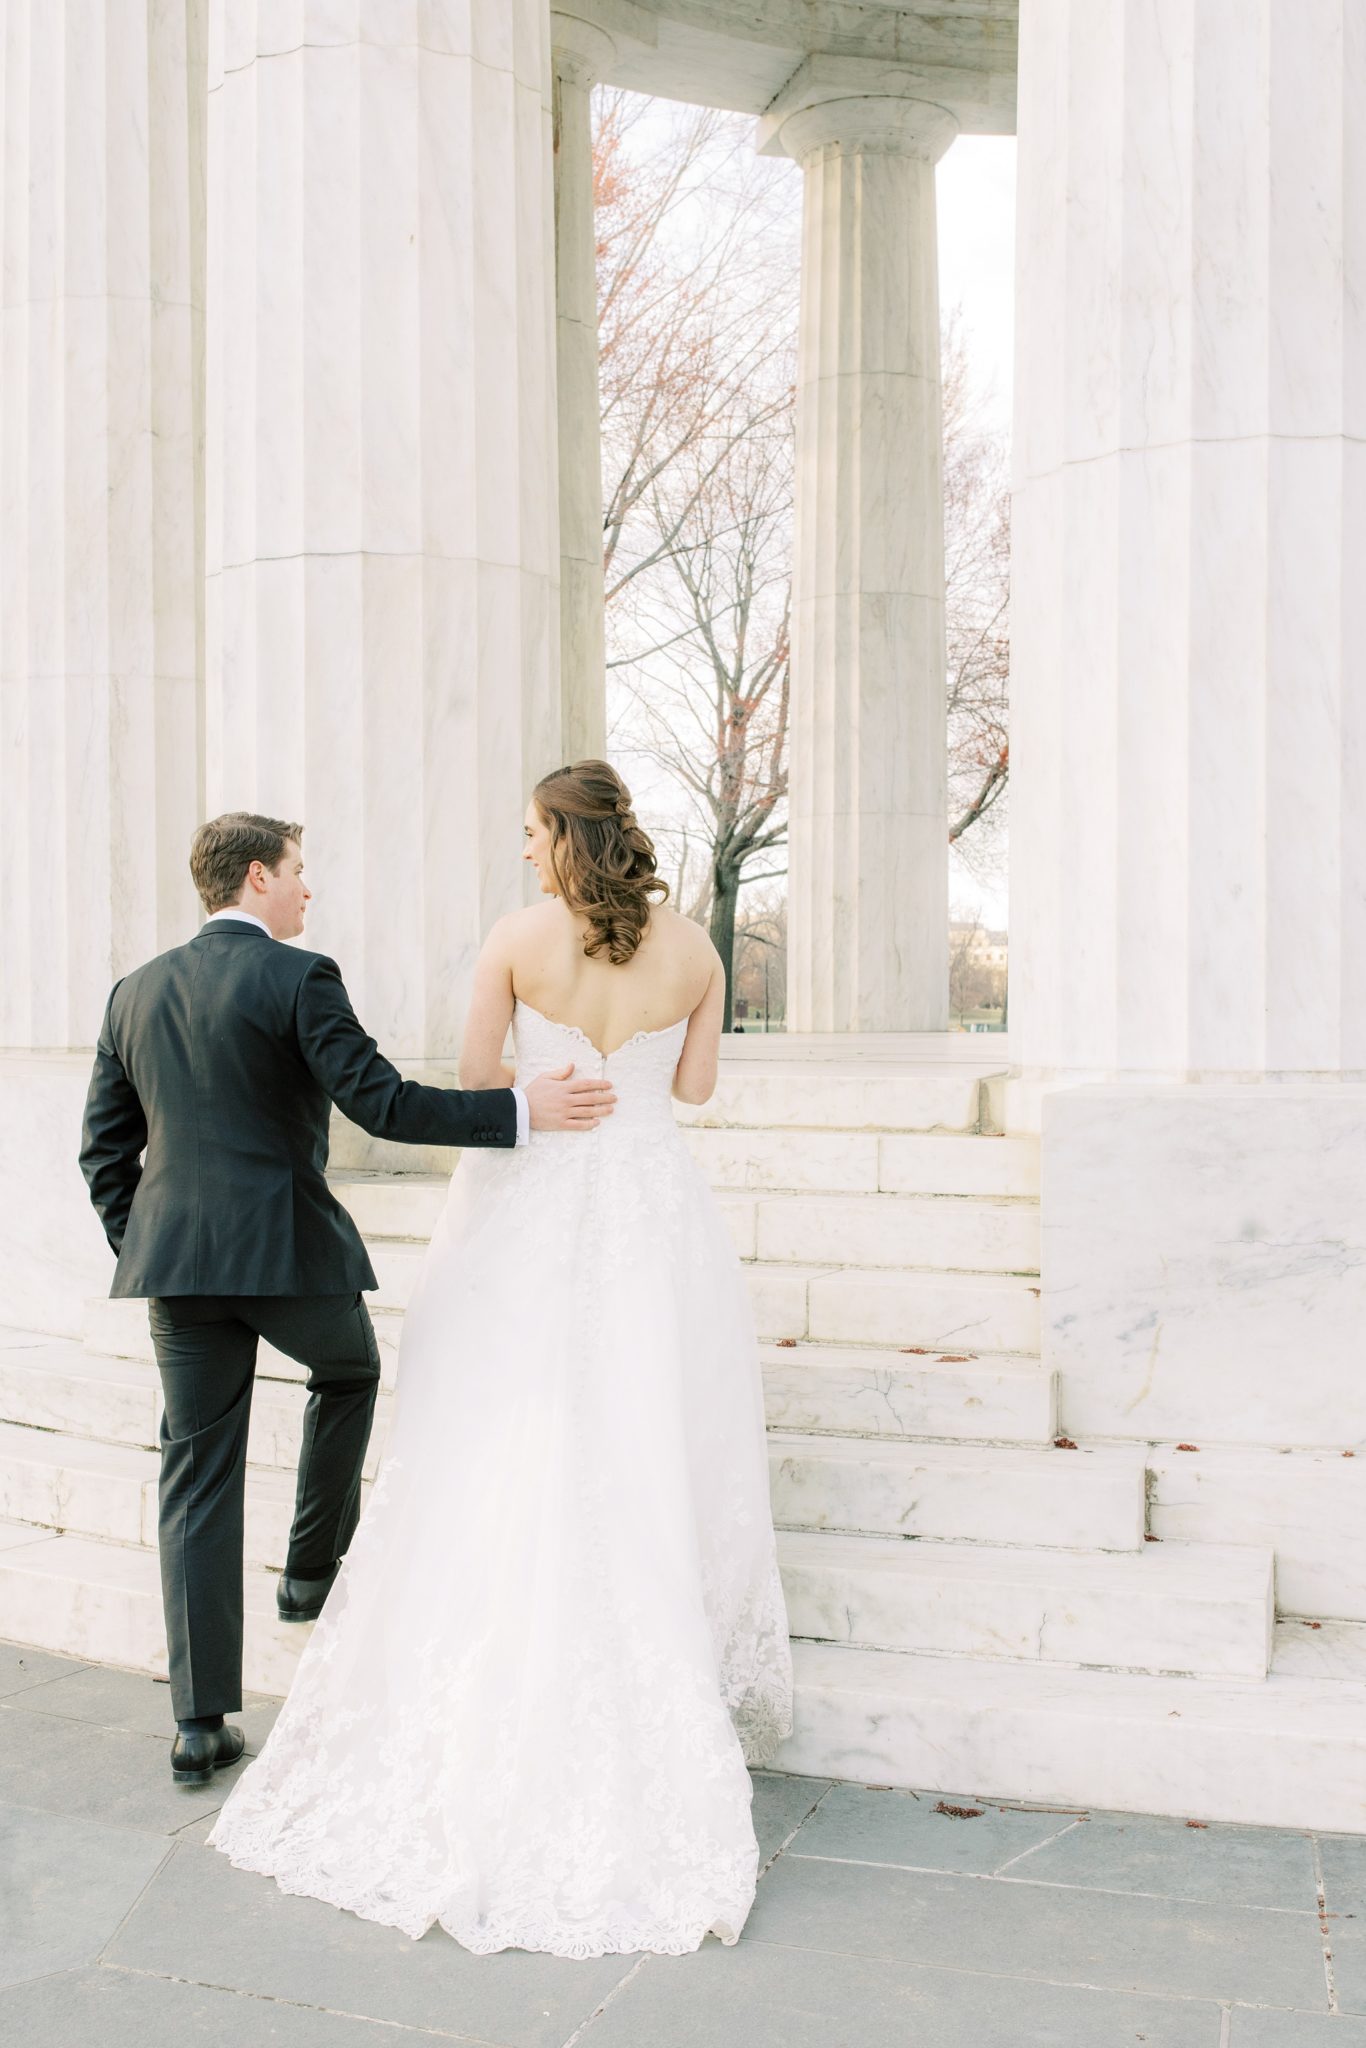 A romantic winter wedding across Washington, DC including St Matthews Cathedral, the DC War Memorial, and the National Museum of Women in the Arts.